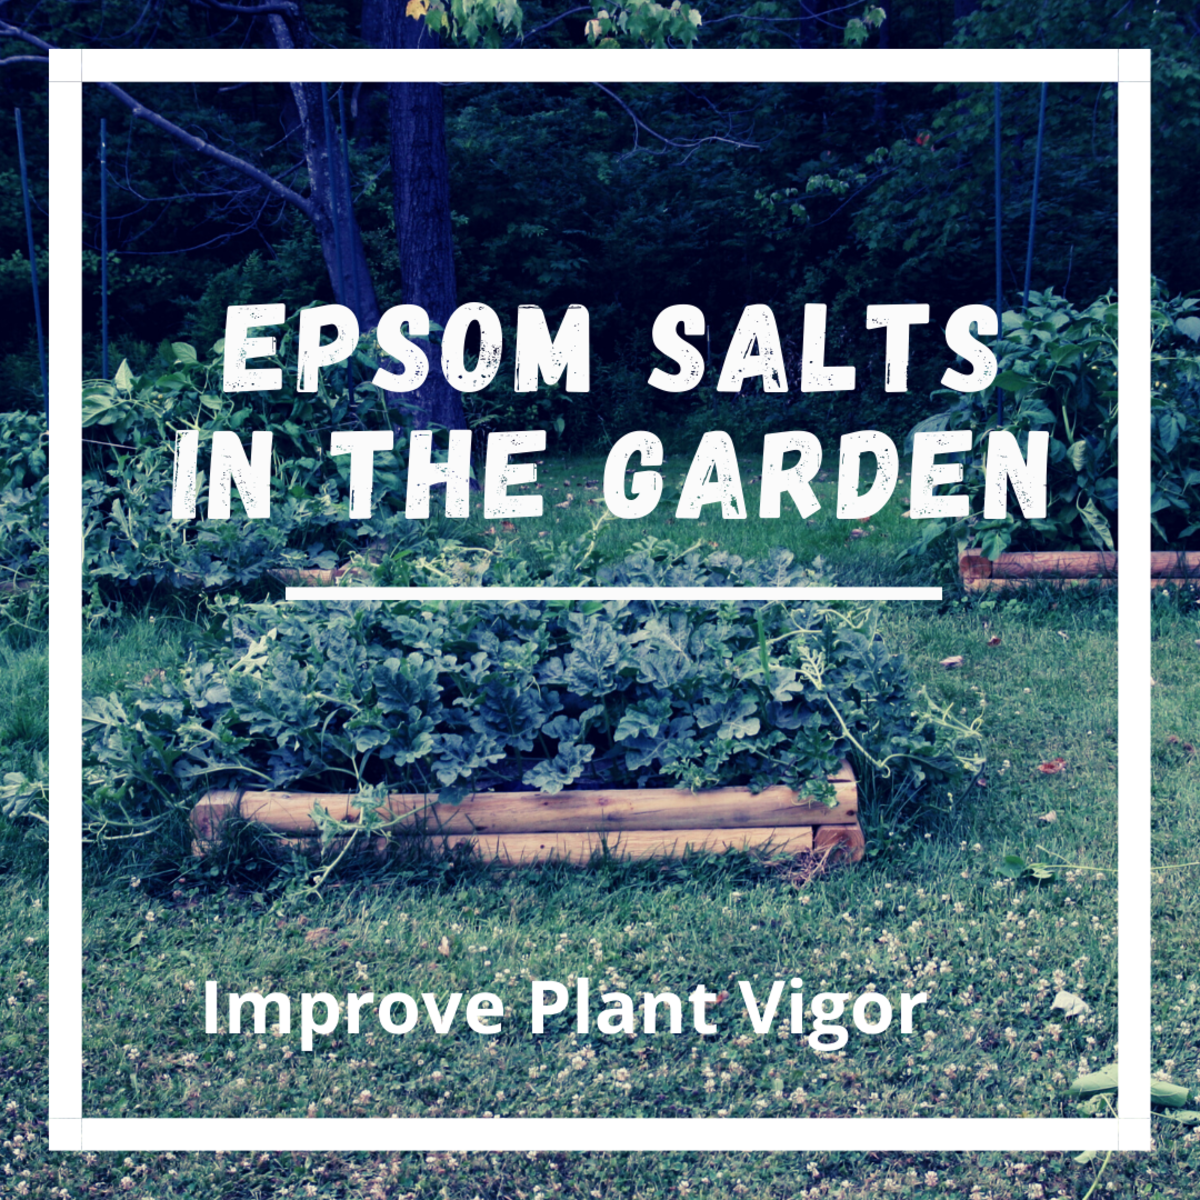 What Can Epsom Salts Do for Your Plants?